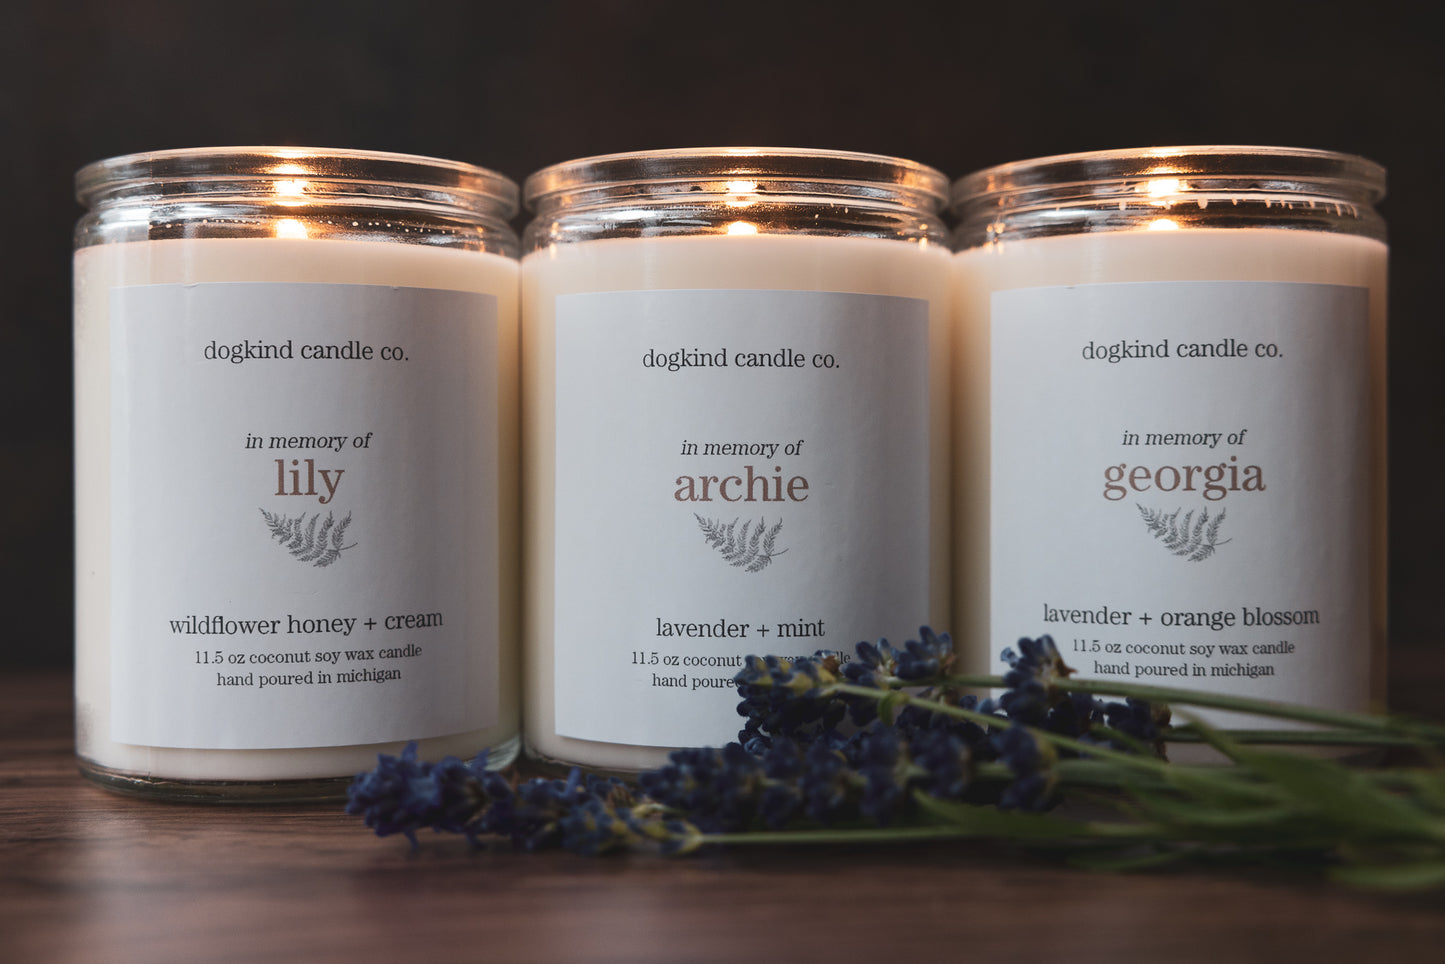 Dogkind Candle Co.